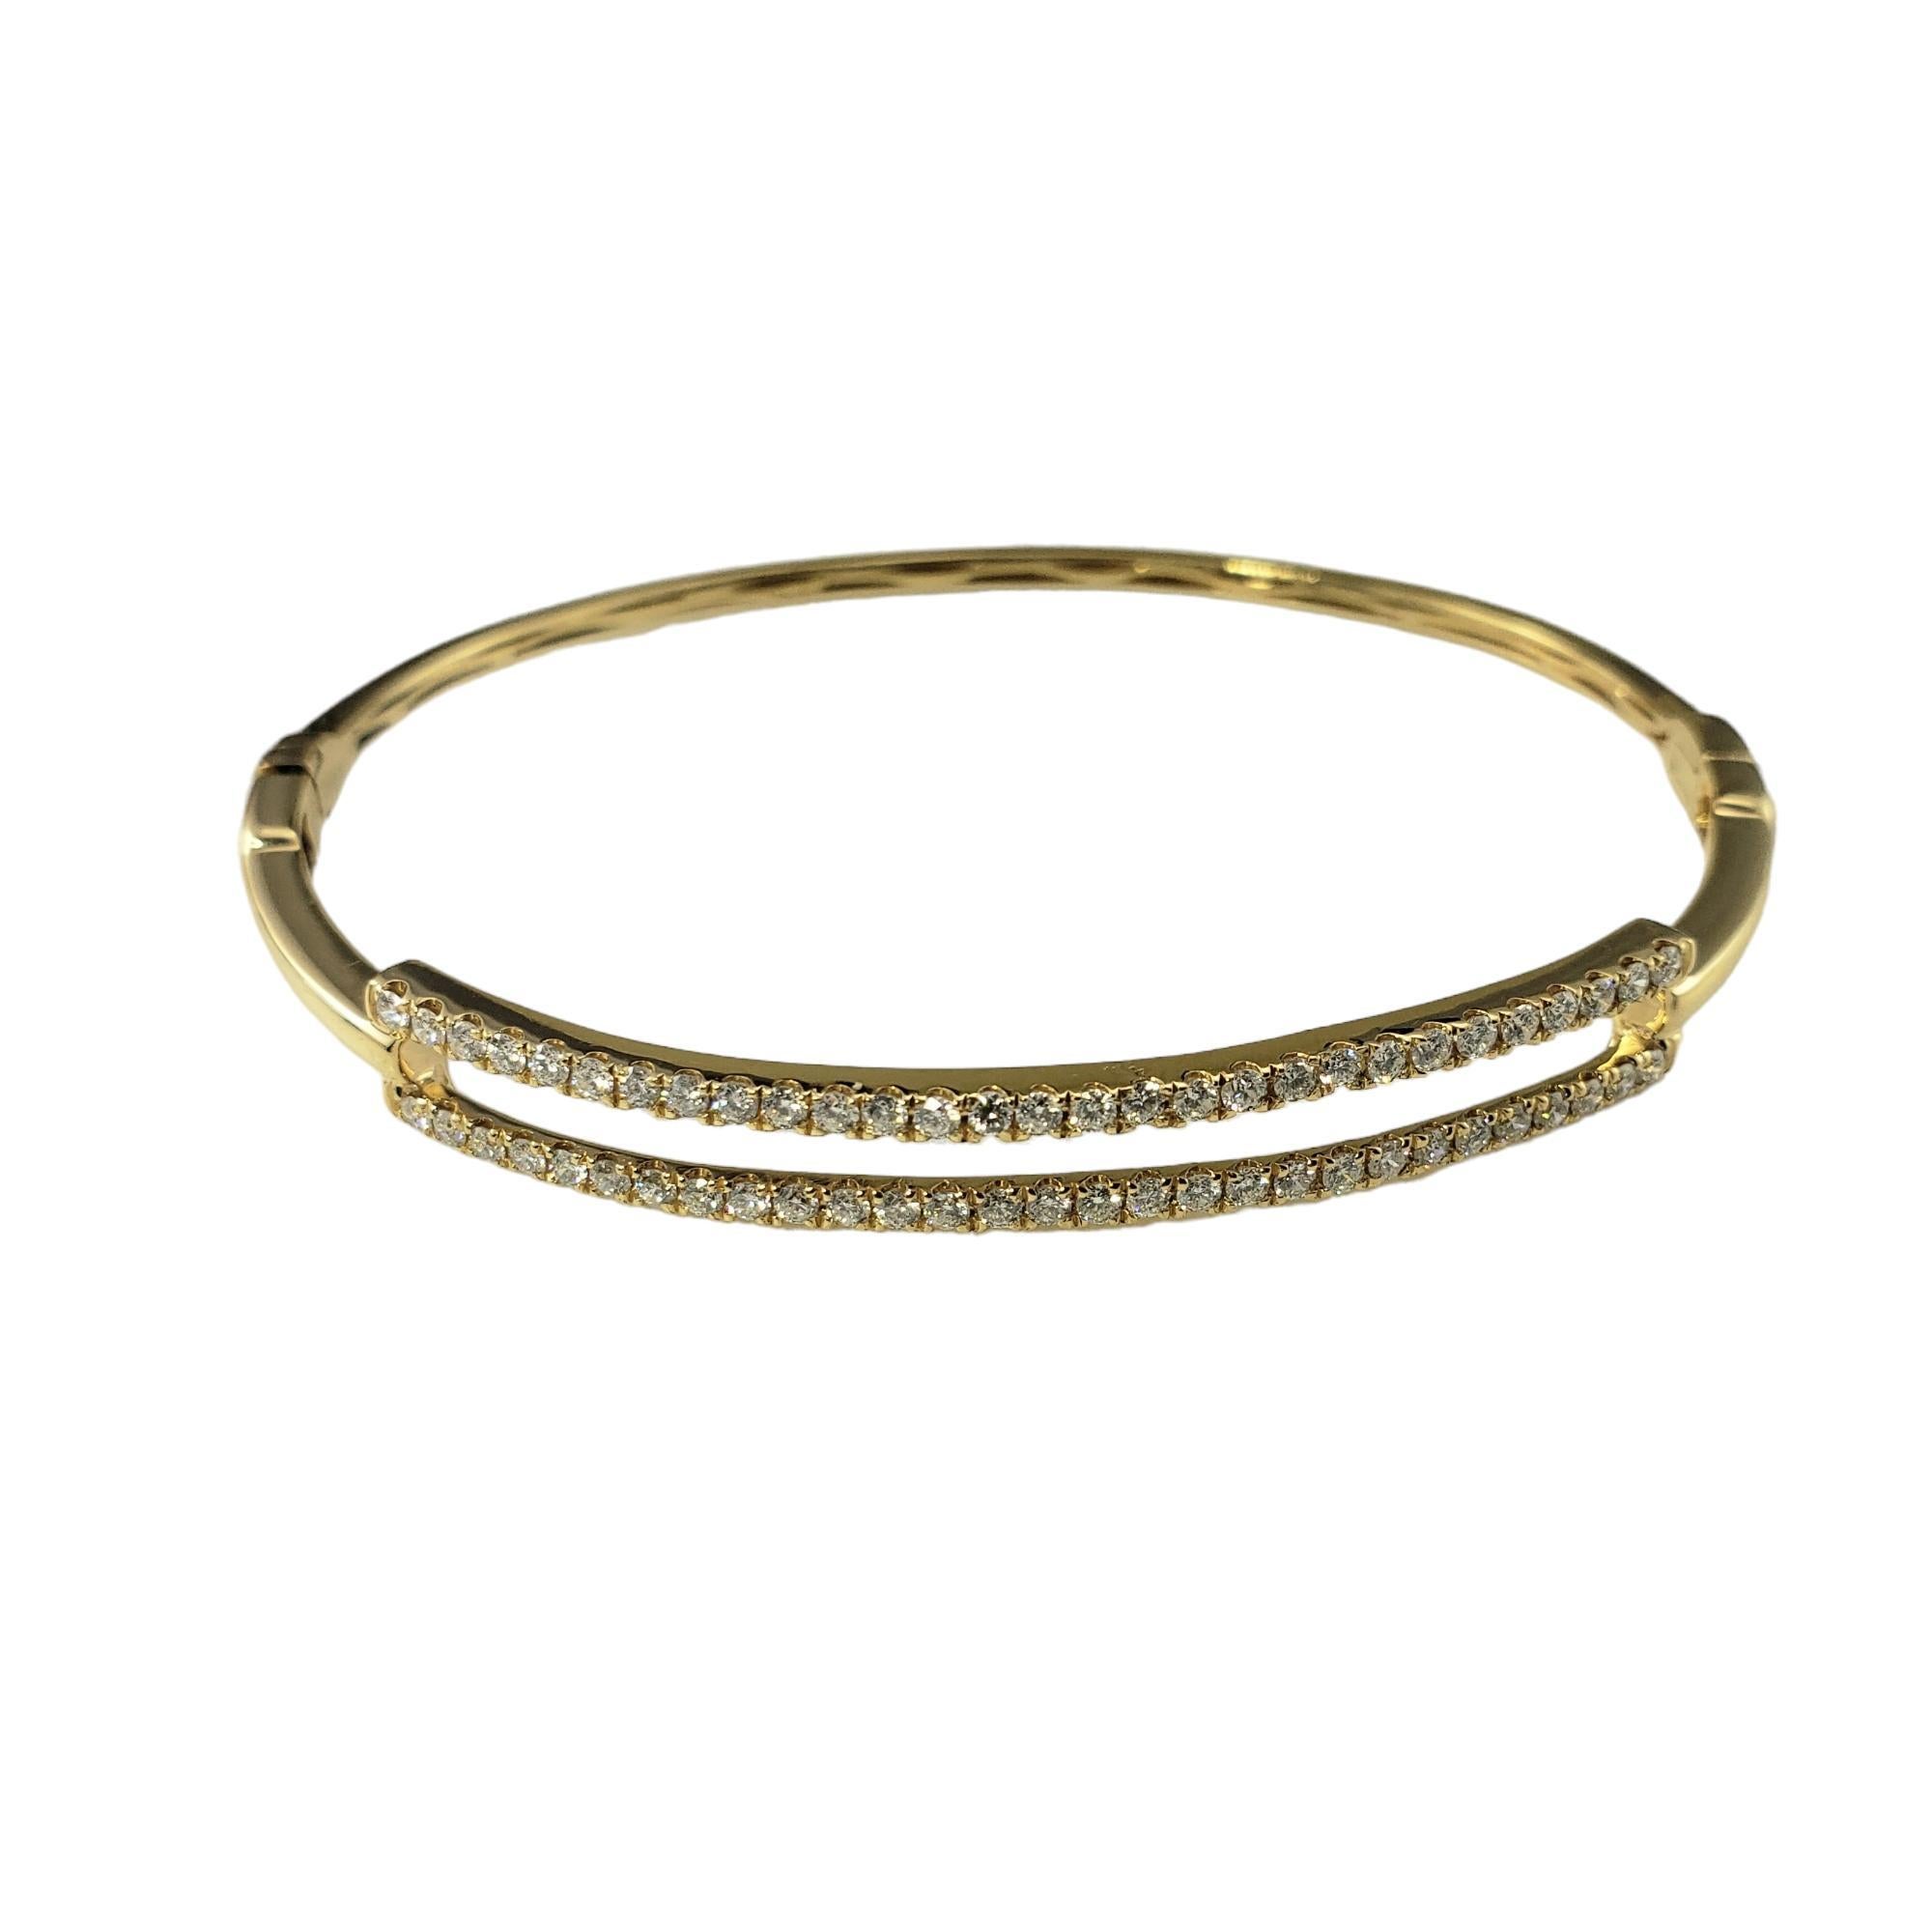 18 Karat Yellow Gold and Diamond Bangle Bracelet

This sparkling bangle bracelet features 58 round brilliant cut diamonds set in beautifully detailed 18K yellow gold.  Hinged closure.  

Width: 6 mm.

Approximate total diamond weight: .60